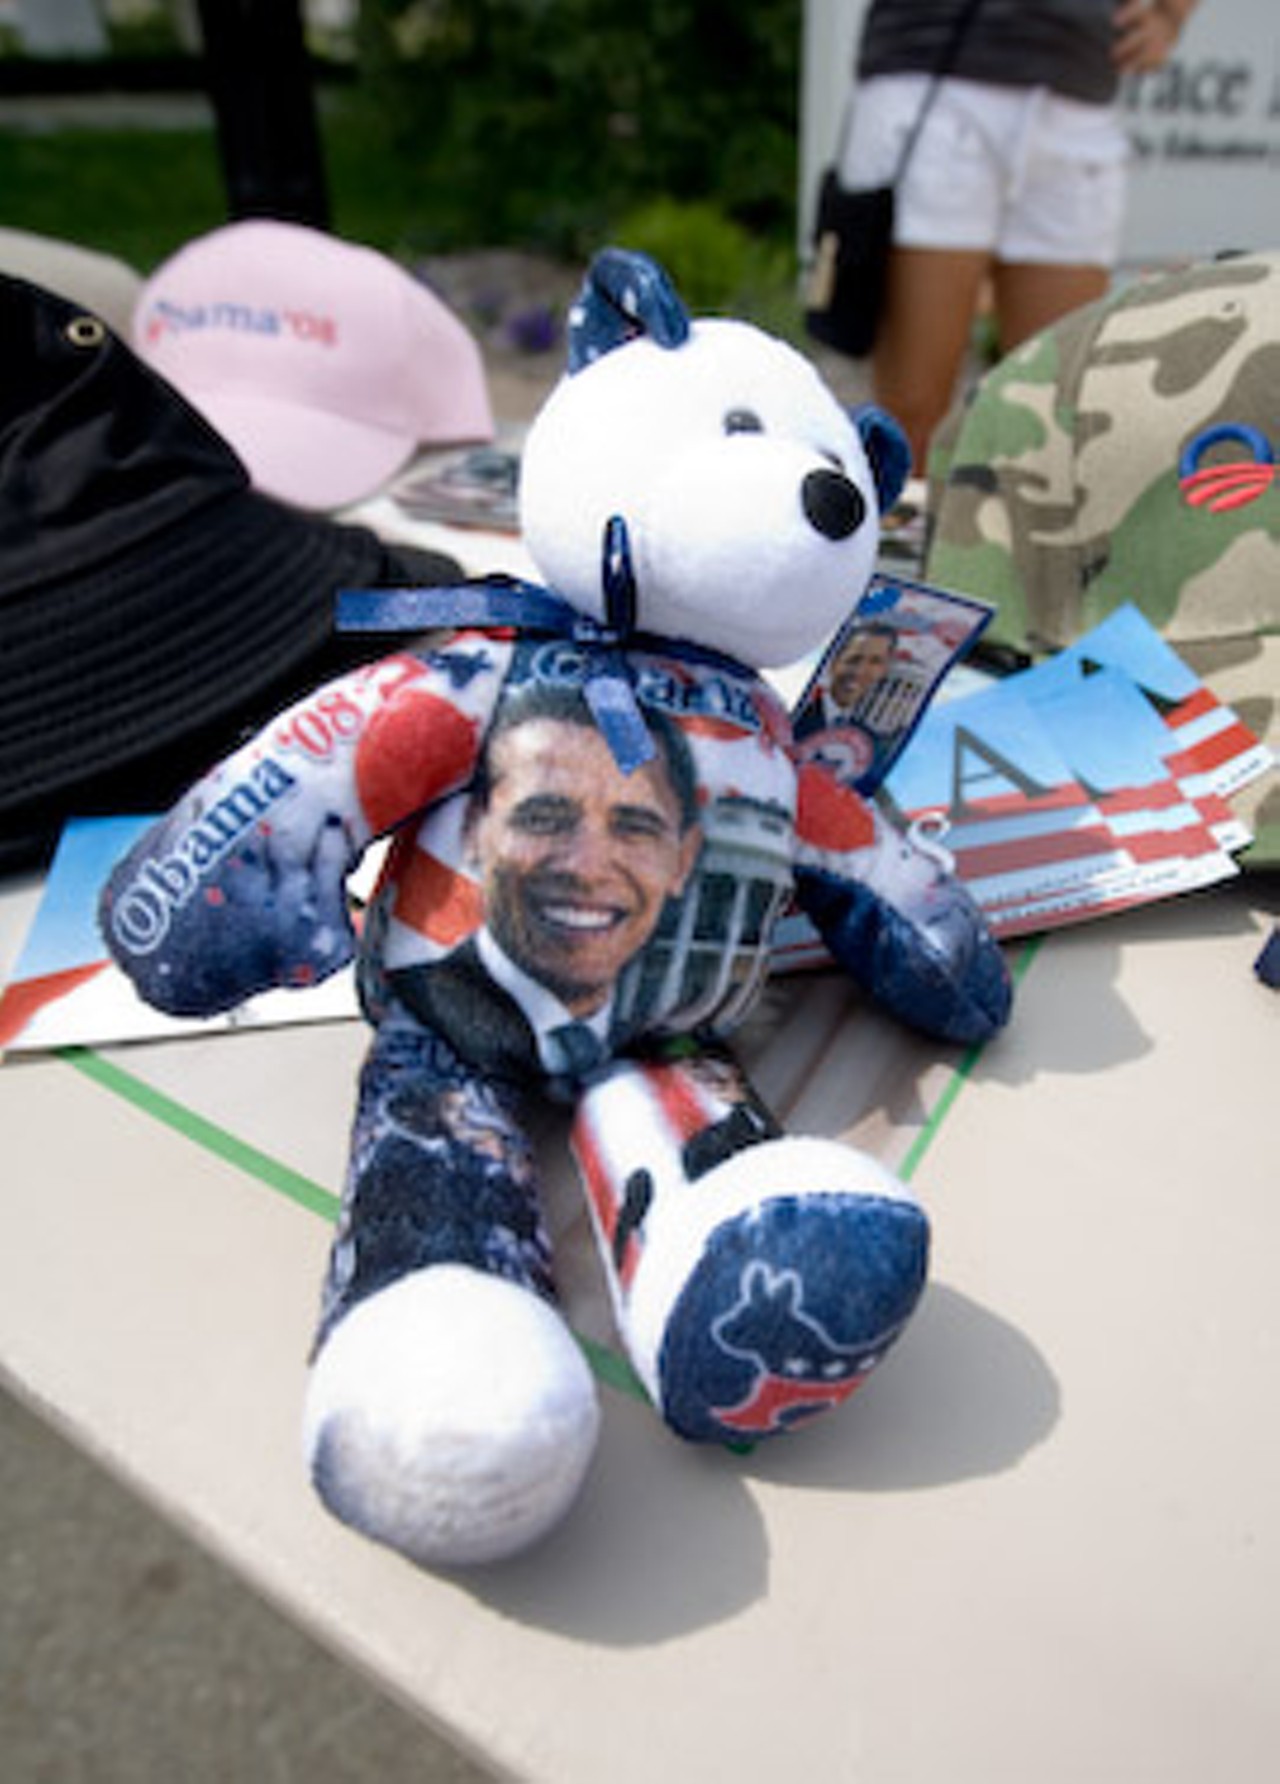 Obama merchandise came in all shapes and sizes.